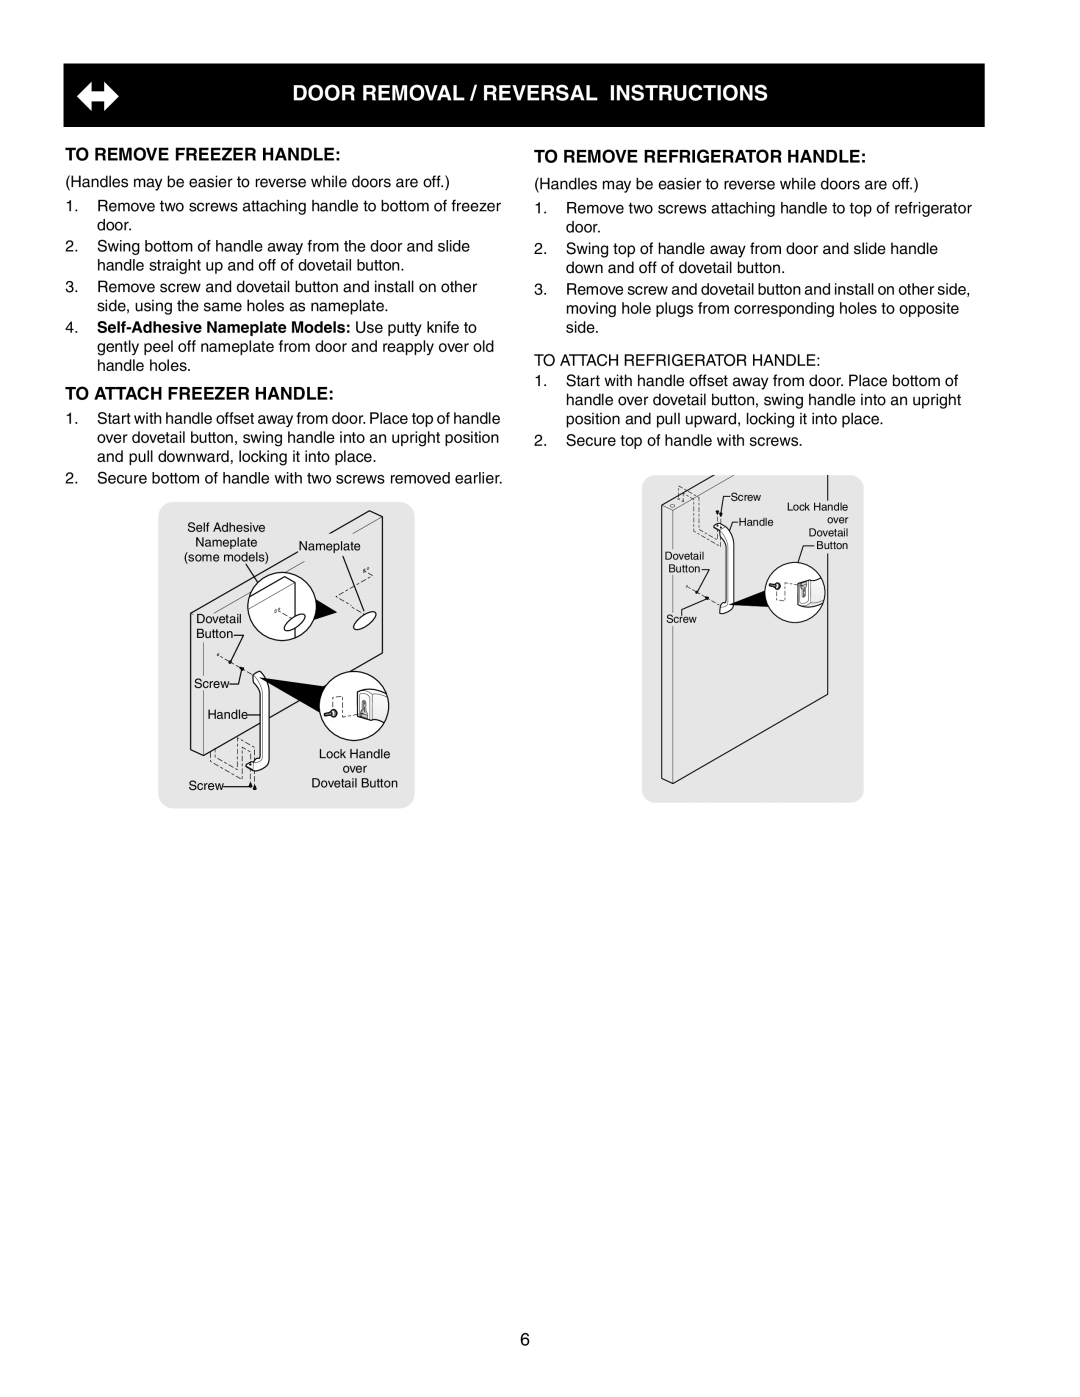 White-Westinghouse 241997501 Door Removal / reversal Instructions, To Remove Freezer Handle, To attach freezer handle 